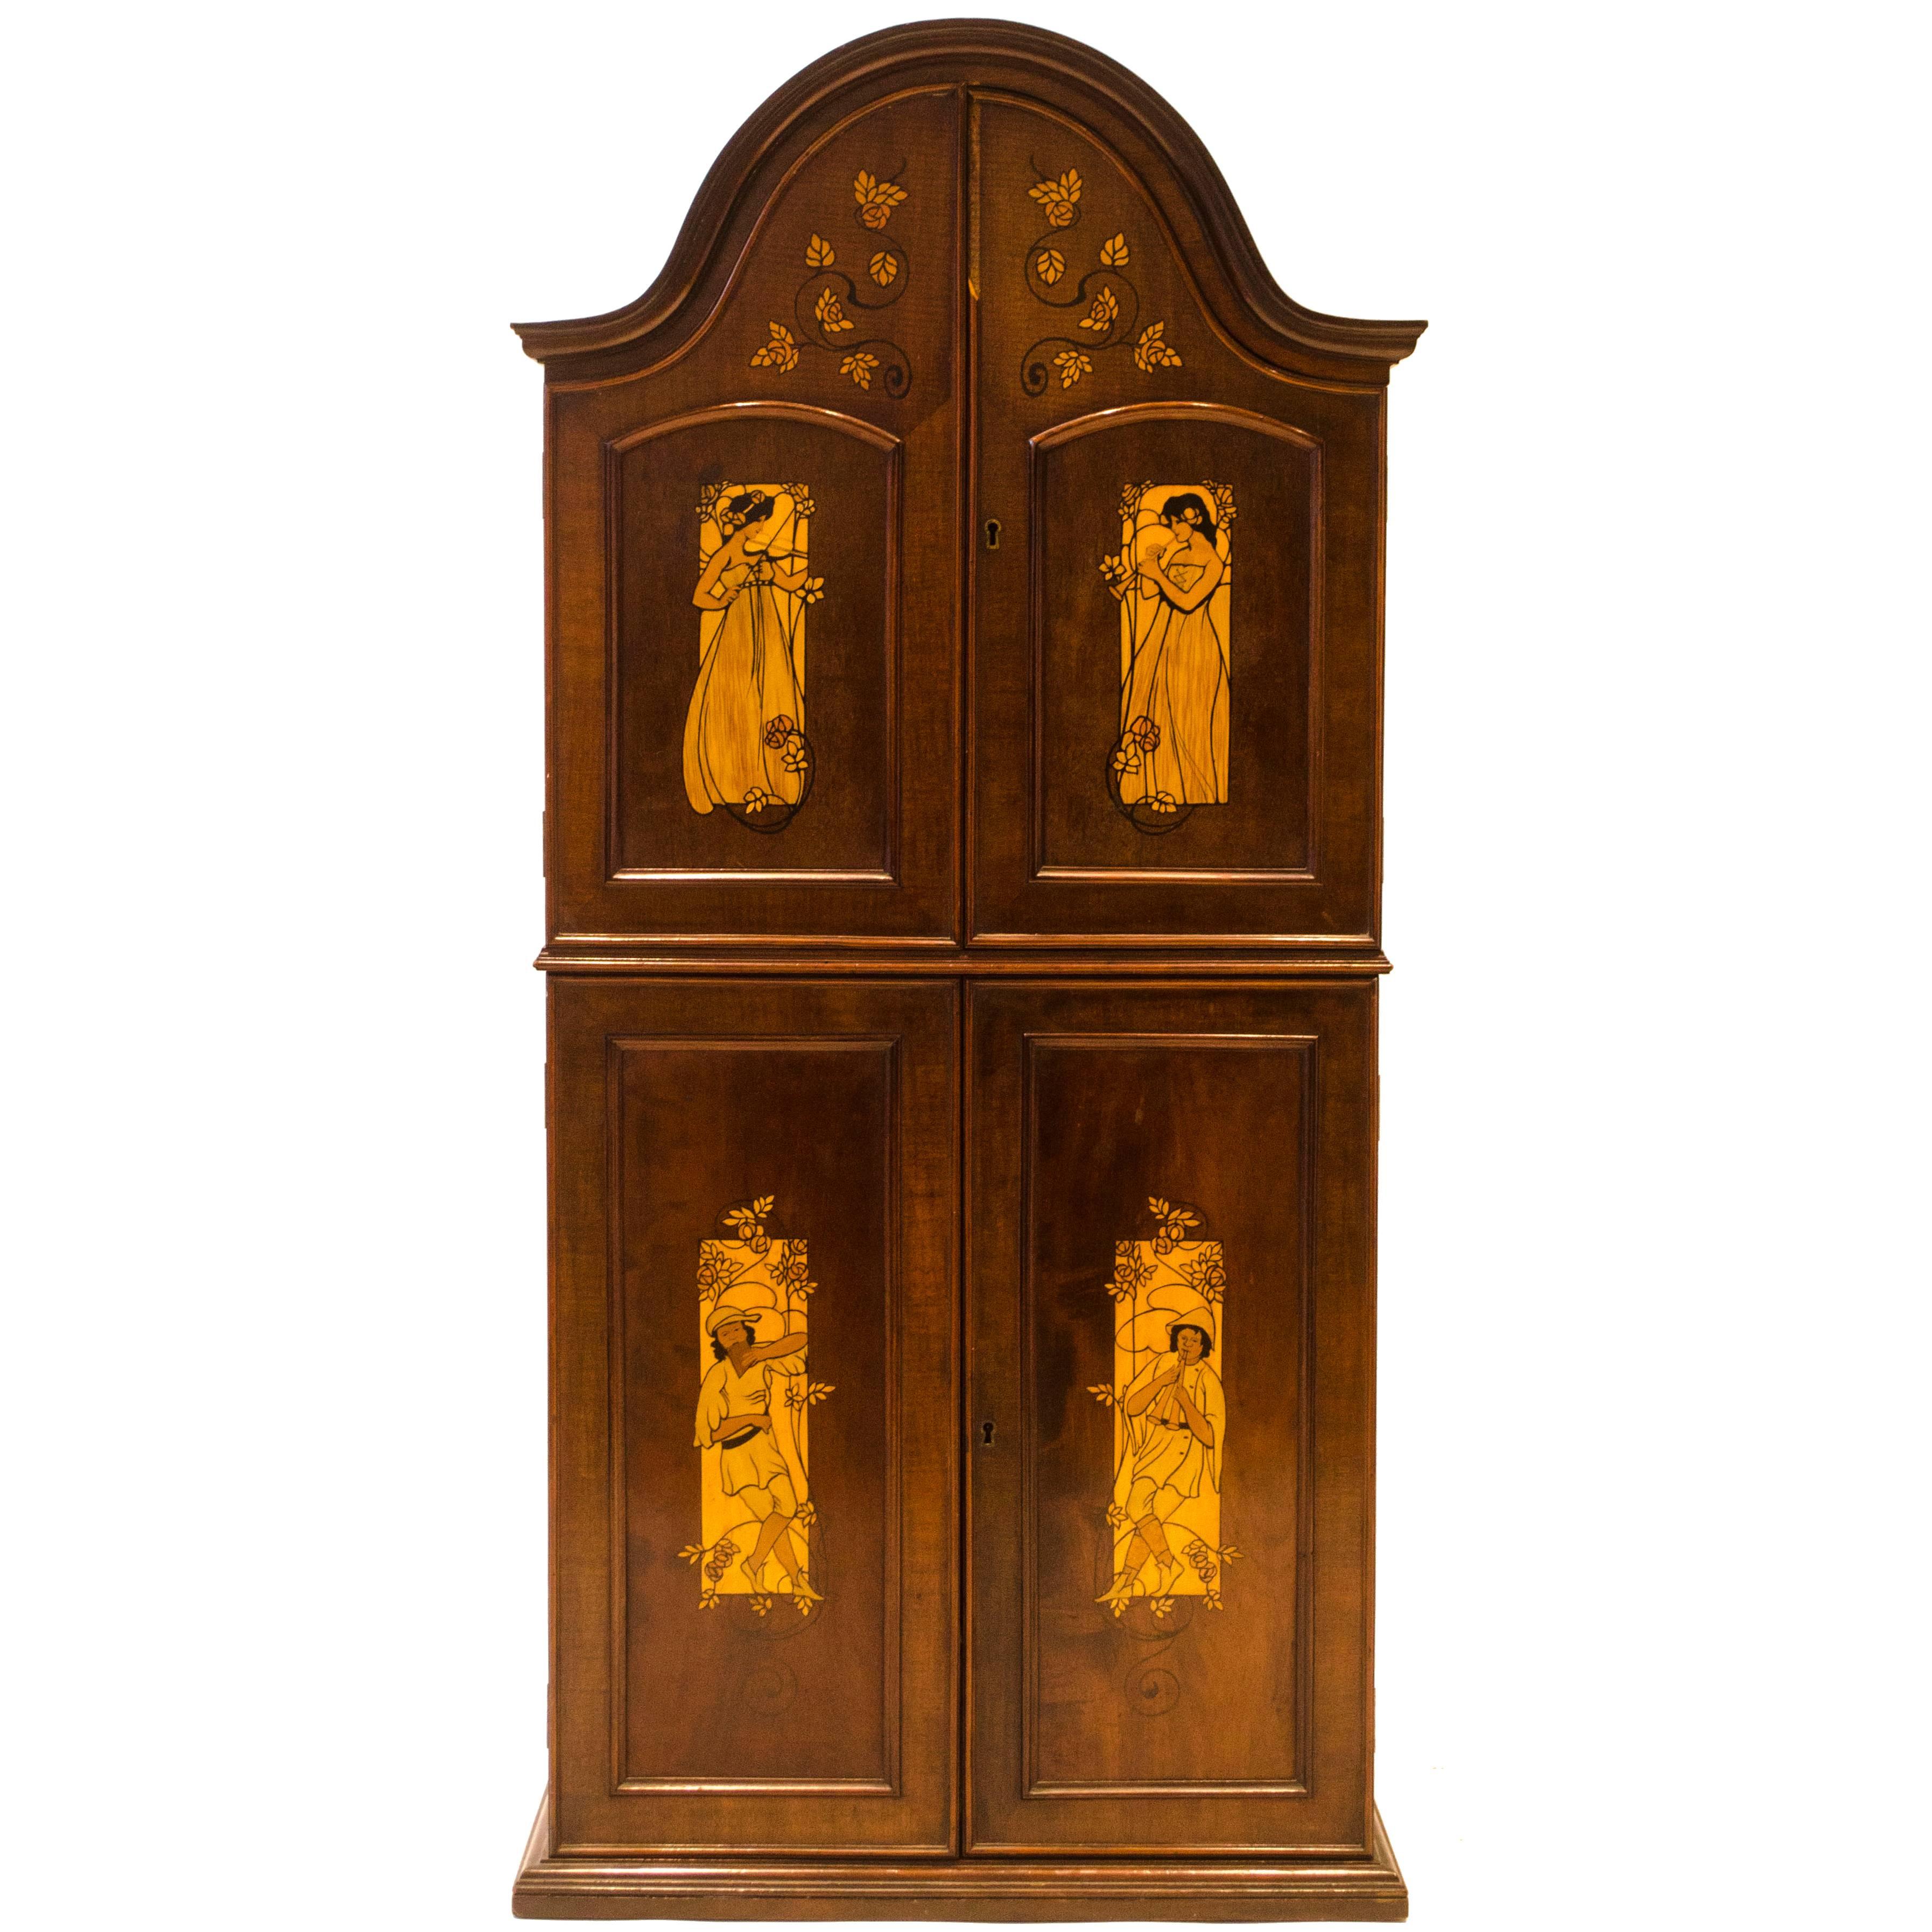 W J Neatby Attri, English Art Nouveau Music Cabinet with Musicians to the Doors